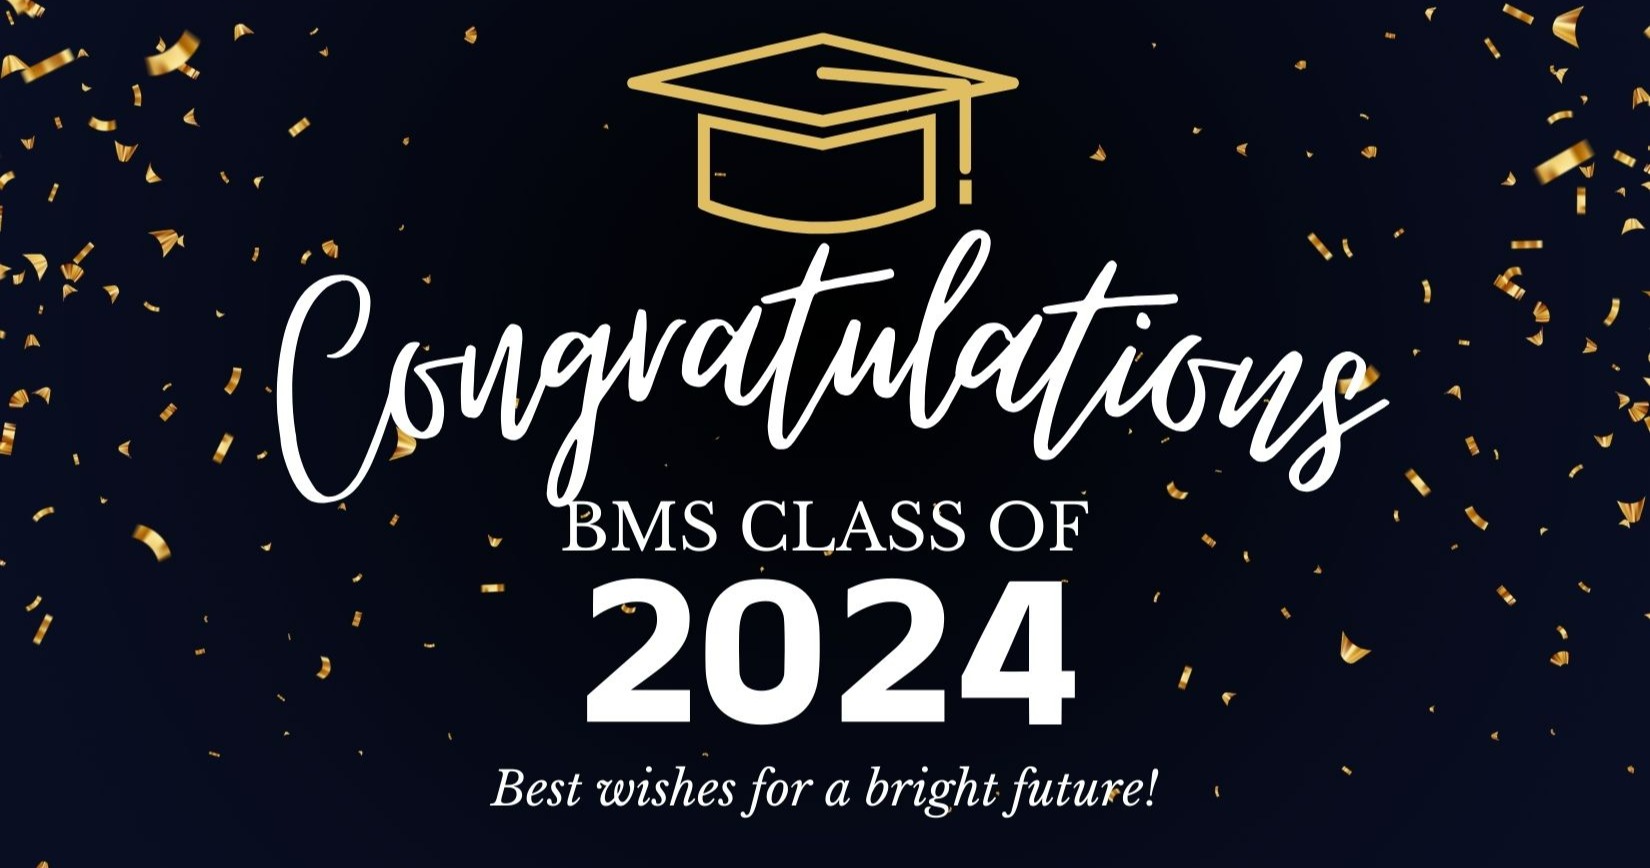 Congratulations BMS Class of 2024.  Best wishes for a bright future!